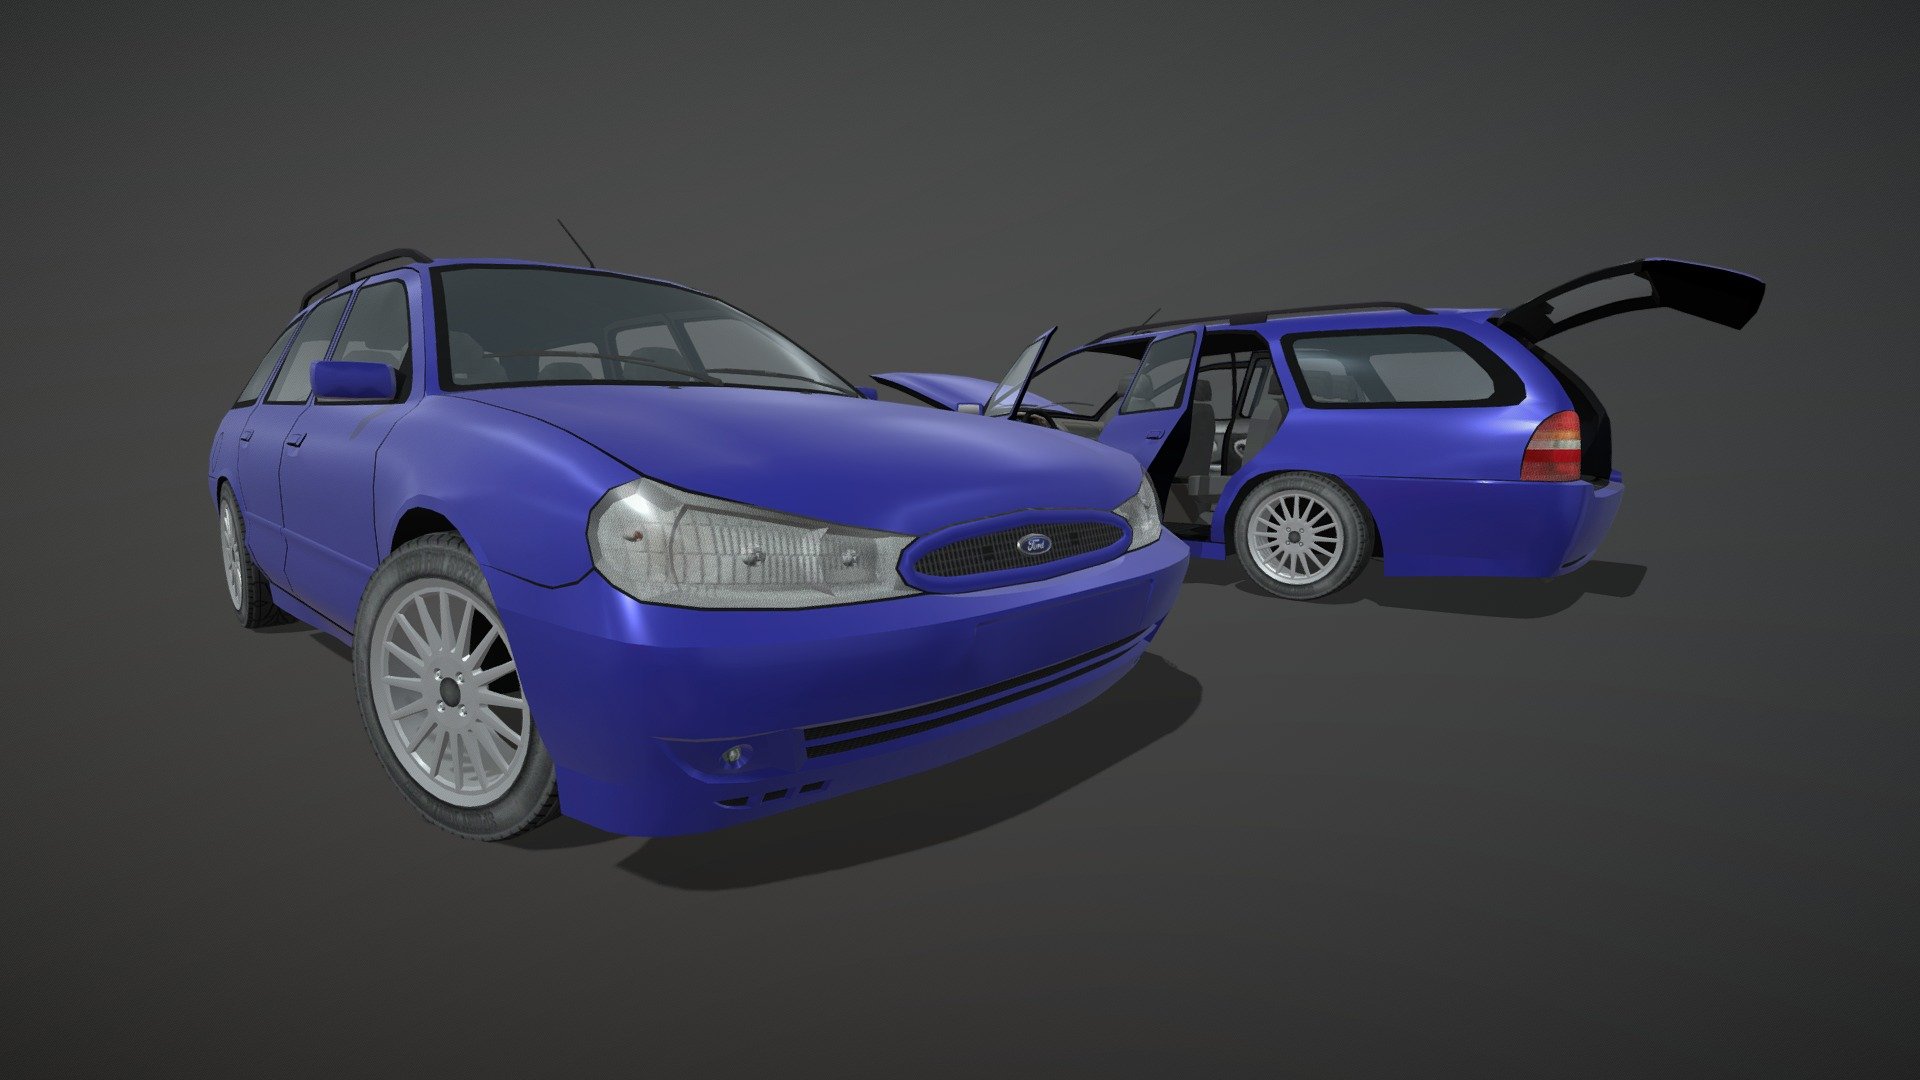 The Ford Mondeo Mk2 ST200 i made from scratch using blueprints and images for NFS ProStreet Pepega Edition.

It was the second car i made for the mod and the most challenging one i had to make.

Of course its not perfect, the model had some major changes over time including a whole overhaul of it because some proportions were off in many spots.

I tried my best in doing it as accurate as possible and im very happy with the final result.

And of course you car drive it and upgrade it in the mod!

I really recomment playing the mod because my friends put a lot of effort into it and they deserve it.

You can get the mod here:

https://pepegamod.com/pepega-download/

Special Thanks for:

-Pepega Team for giving me a chance and of course for being the best dudes i ever met,

-Marf, Ekskalibur12, and my other great friends for their support,

-And of course You for playing the mod and enjoying the work me and my friends did 3d model